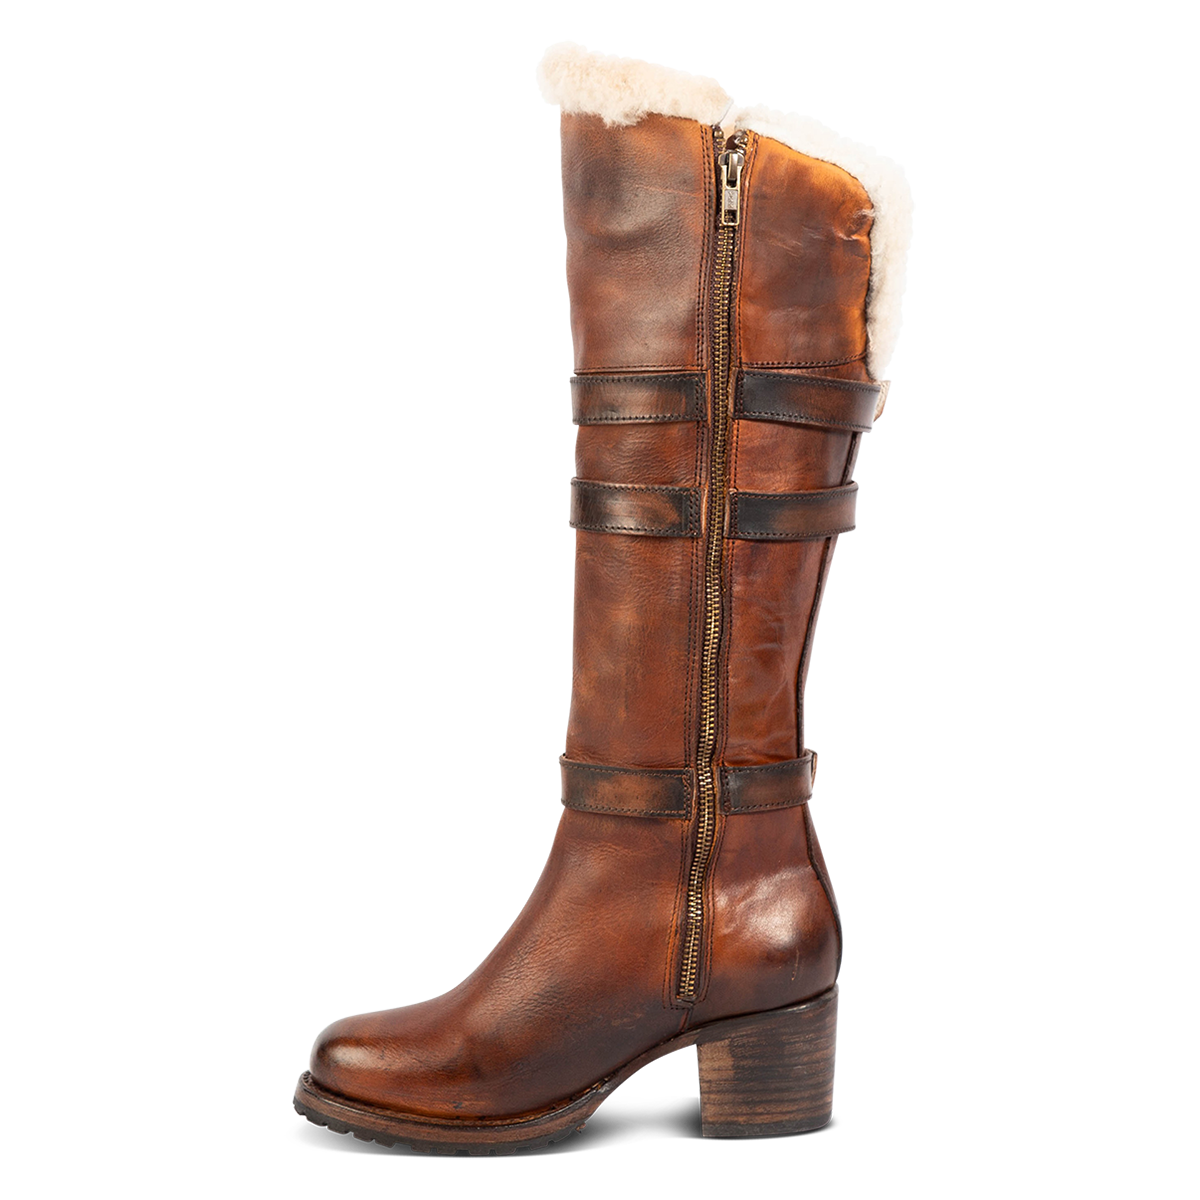 Inside view showing a full working inside brass zipper, stacked heel, decorative shaft belts and shearling lined upper on FREEBIRD women's North tan leather boot 